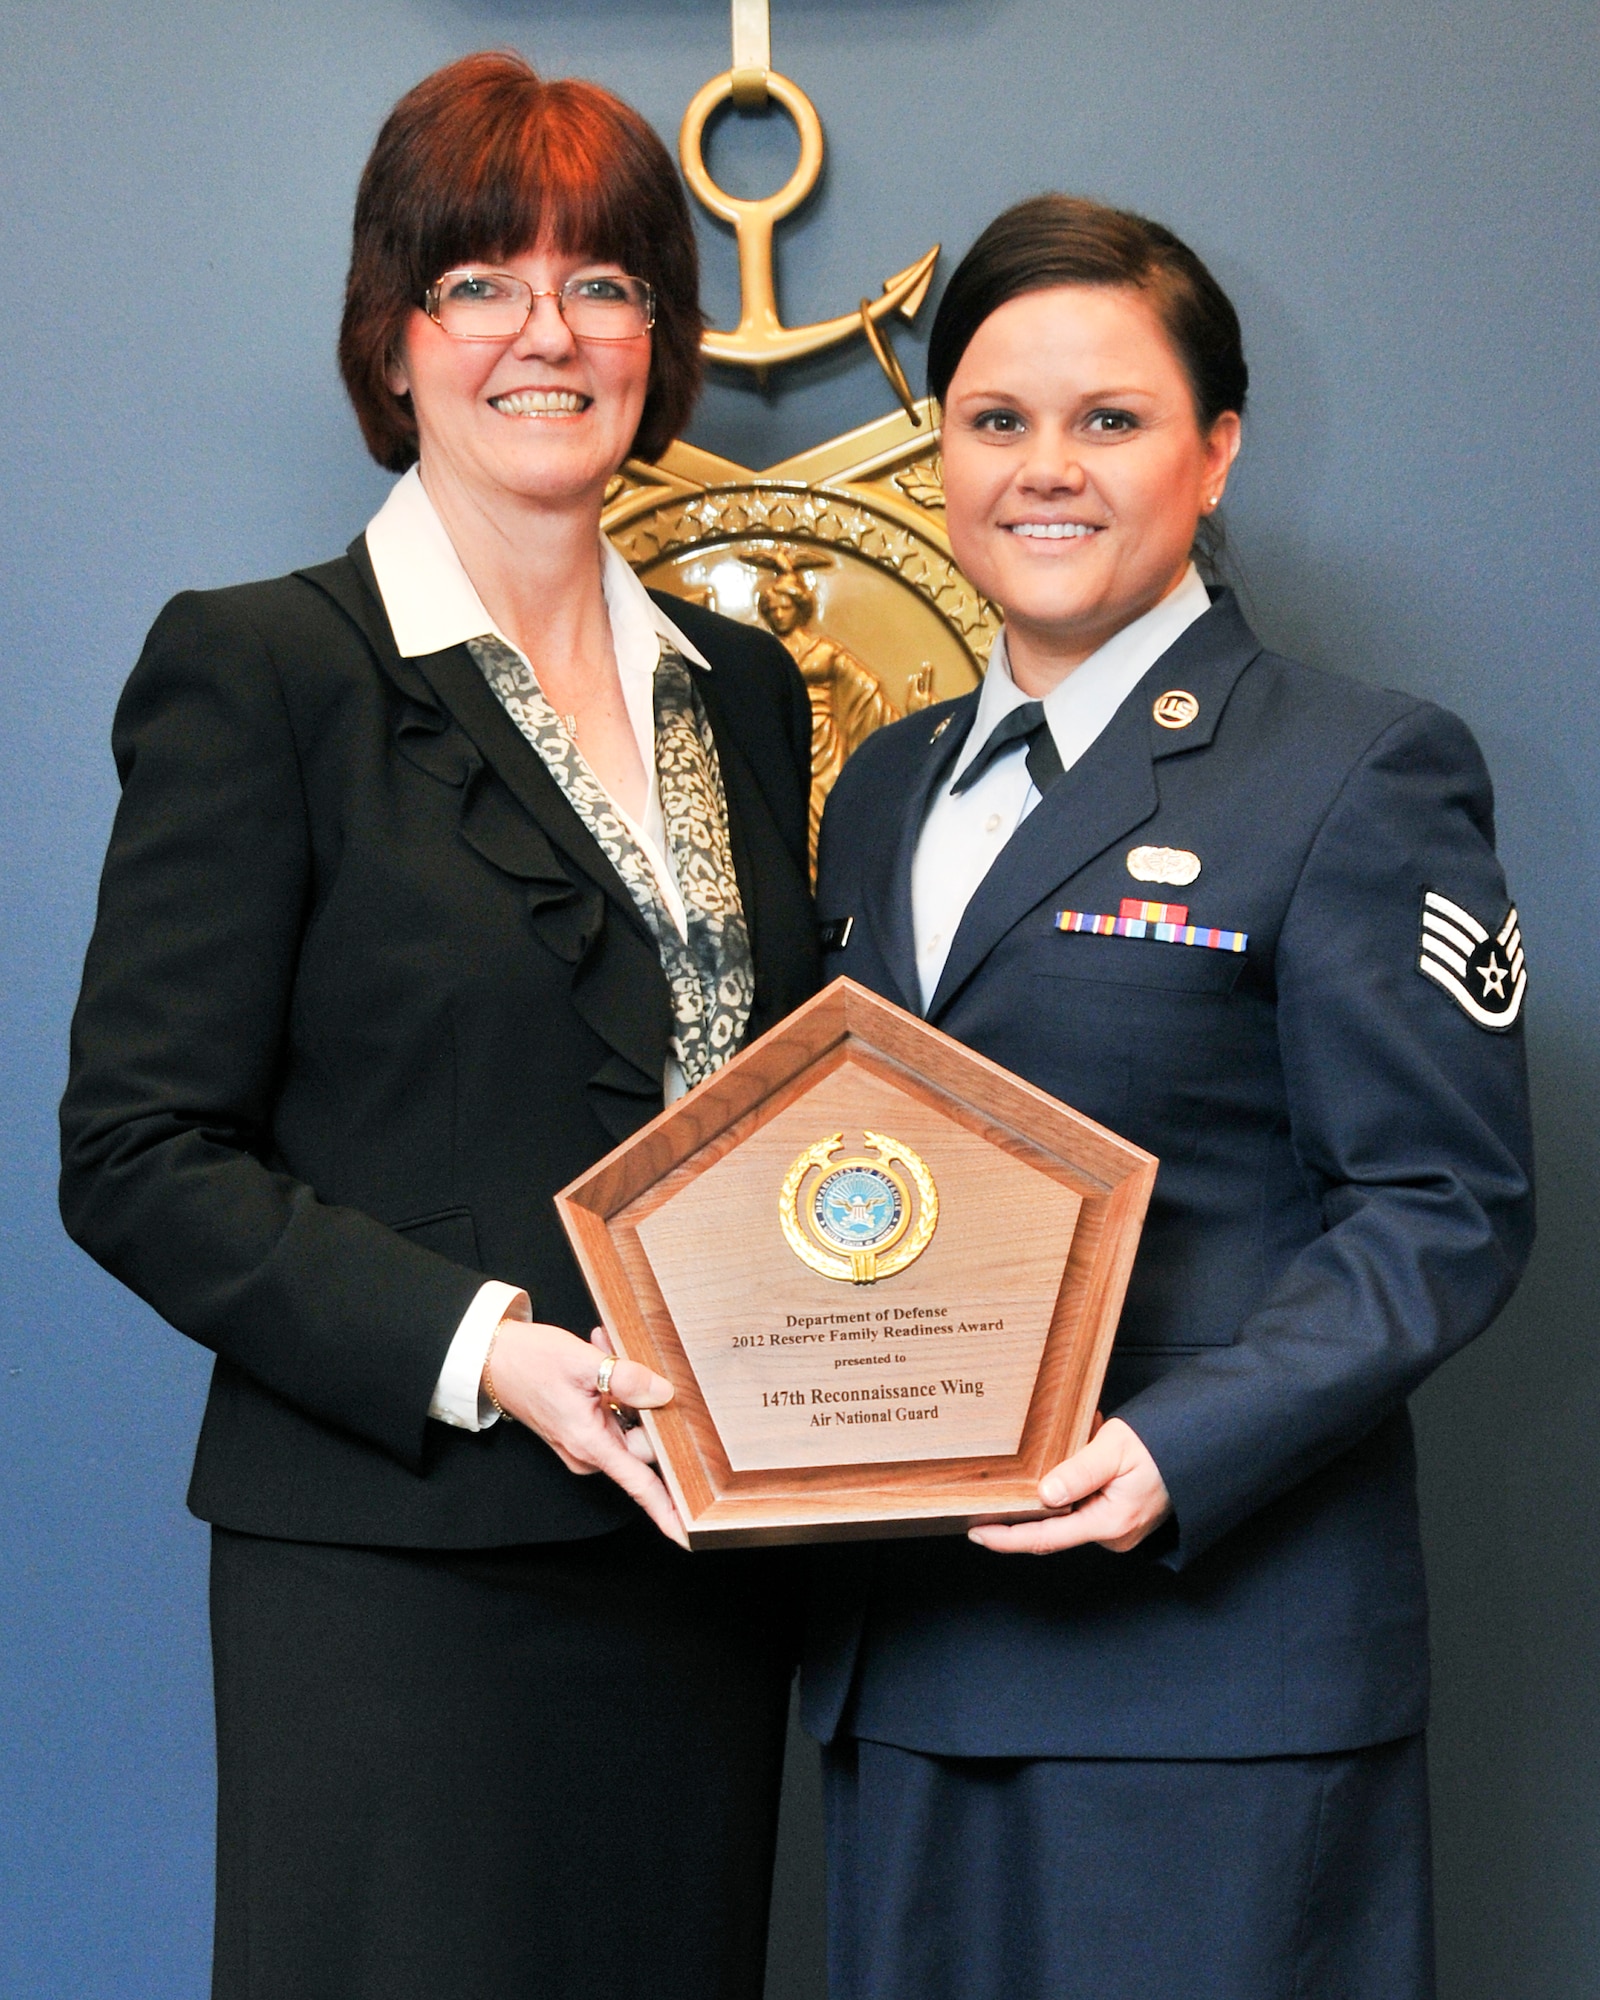 Ms. Monalisa Norton, 147th Reconnaissance Wing Airman and Family Readiness Program Manager, and Staff Sgt. Holly Yeagley, assistant to Ms. Norton, were presented with a plaque during the Department of Defense Reserve Family Readiness Awards ceremony at the Pentagon March 1, 2013. Ms. Norton and the 147th RW Family Readiness office were named as the best in the Air National Guard for 2012. (National Guard photo by Master Sgt. Sean Cowher)